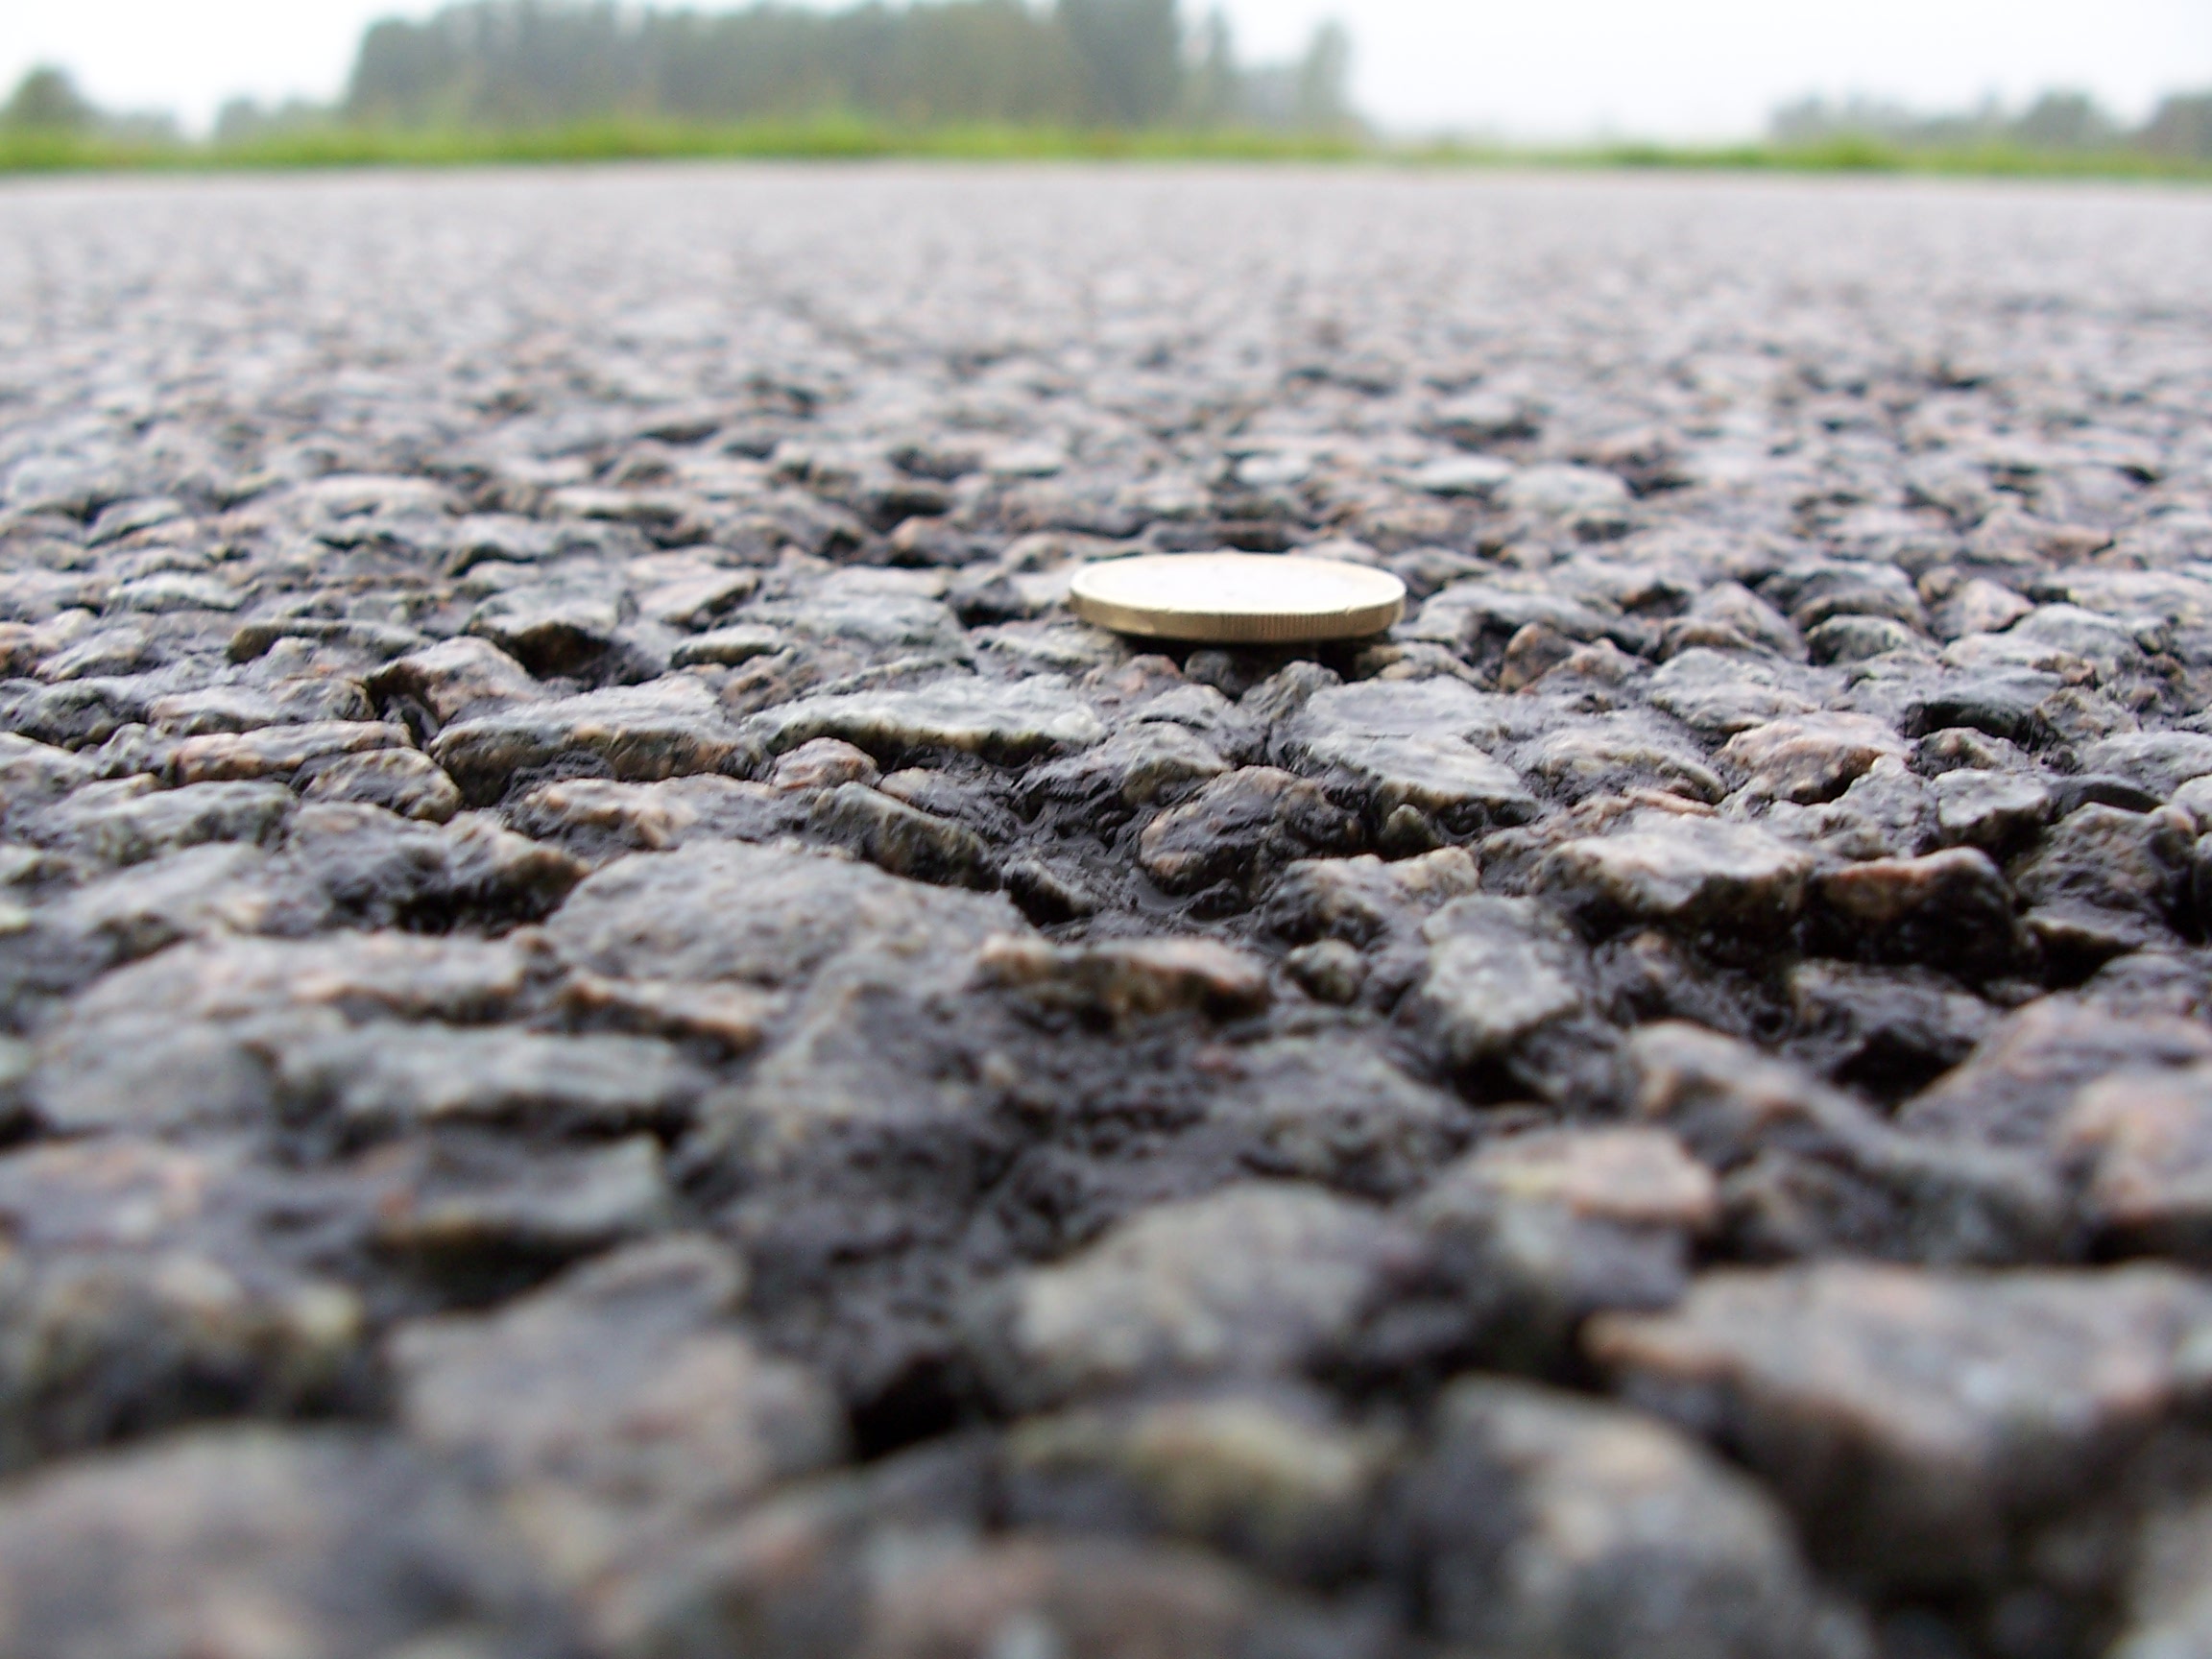 Texture on asphalt pavement with coin